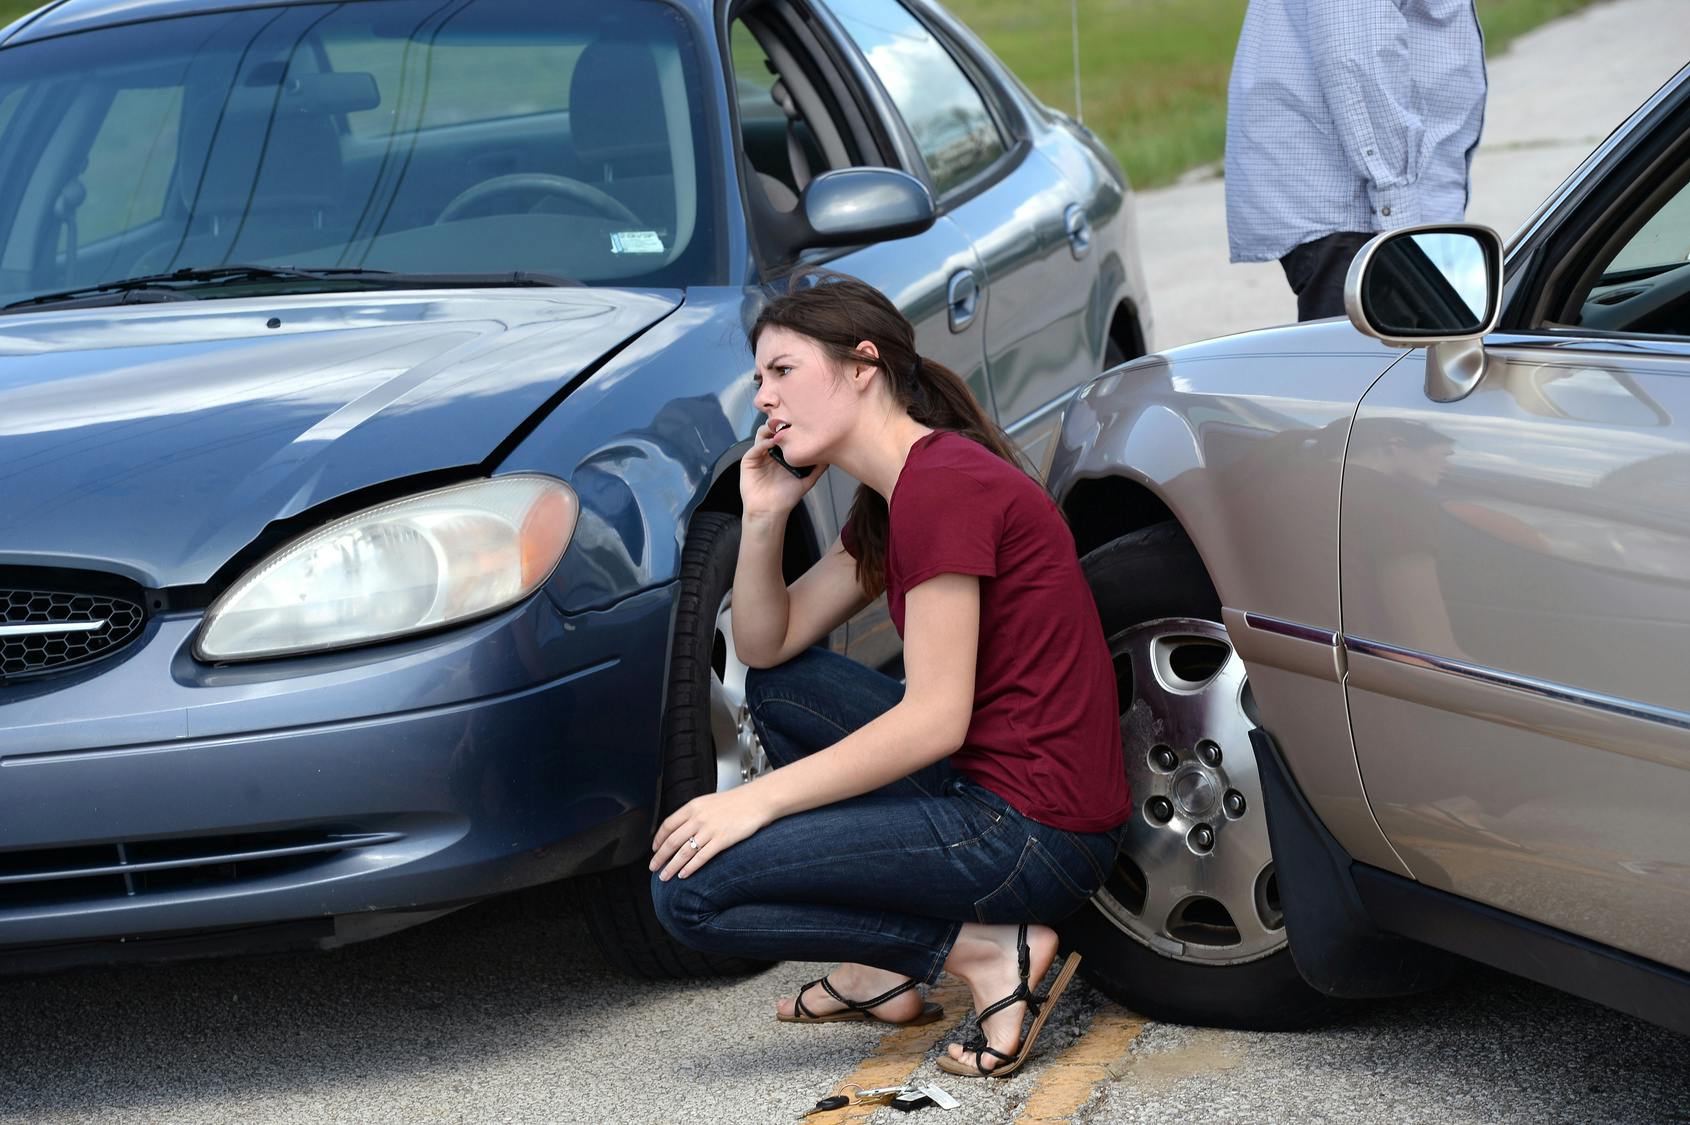 Chiropractic care can be crucial after an auto accident